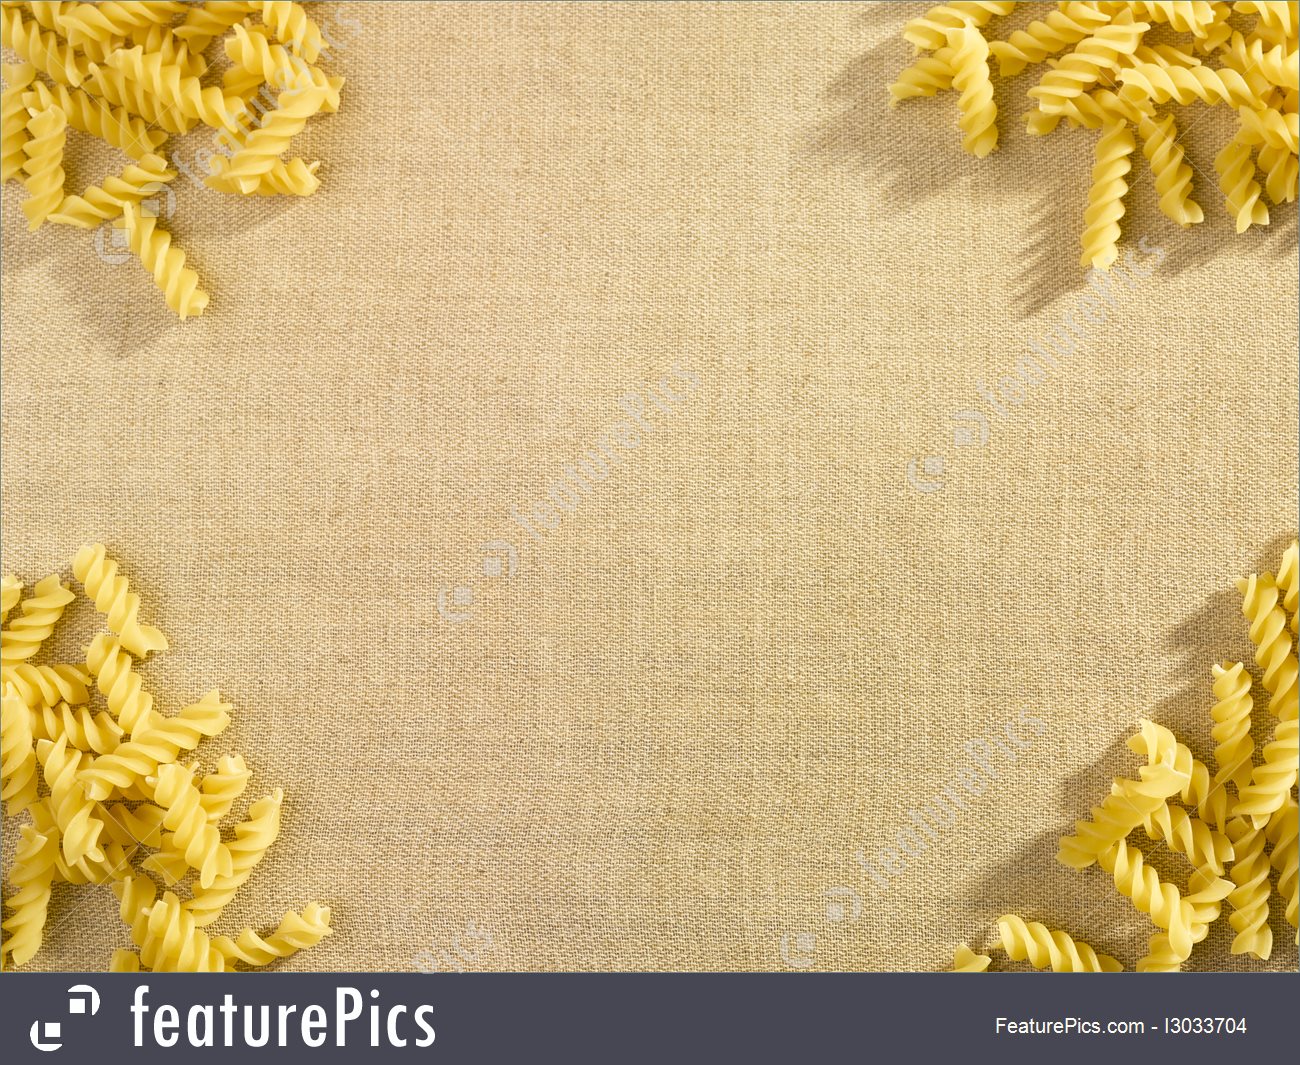 Food Ingredients Pasta On Background Stock Image I3033704 At